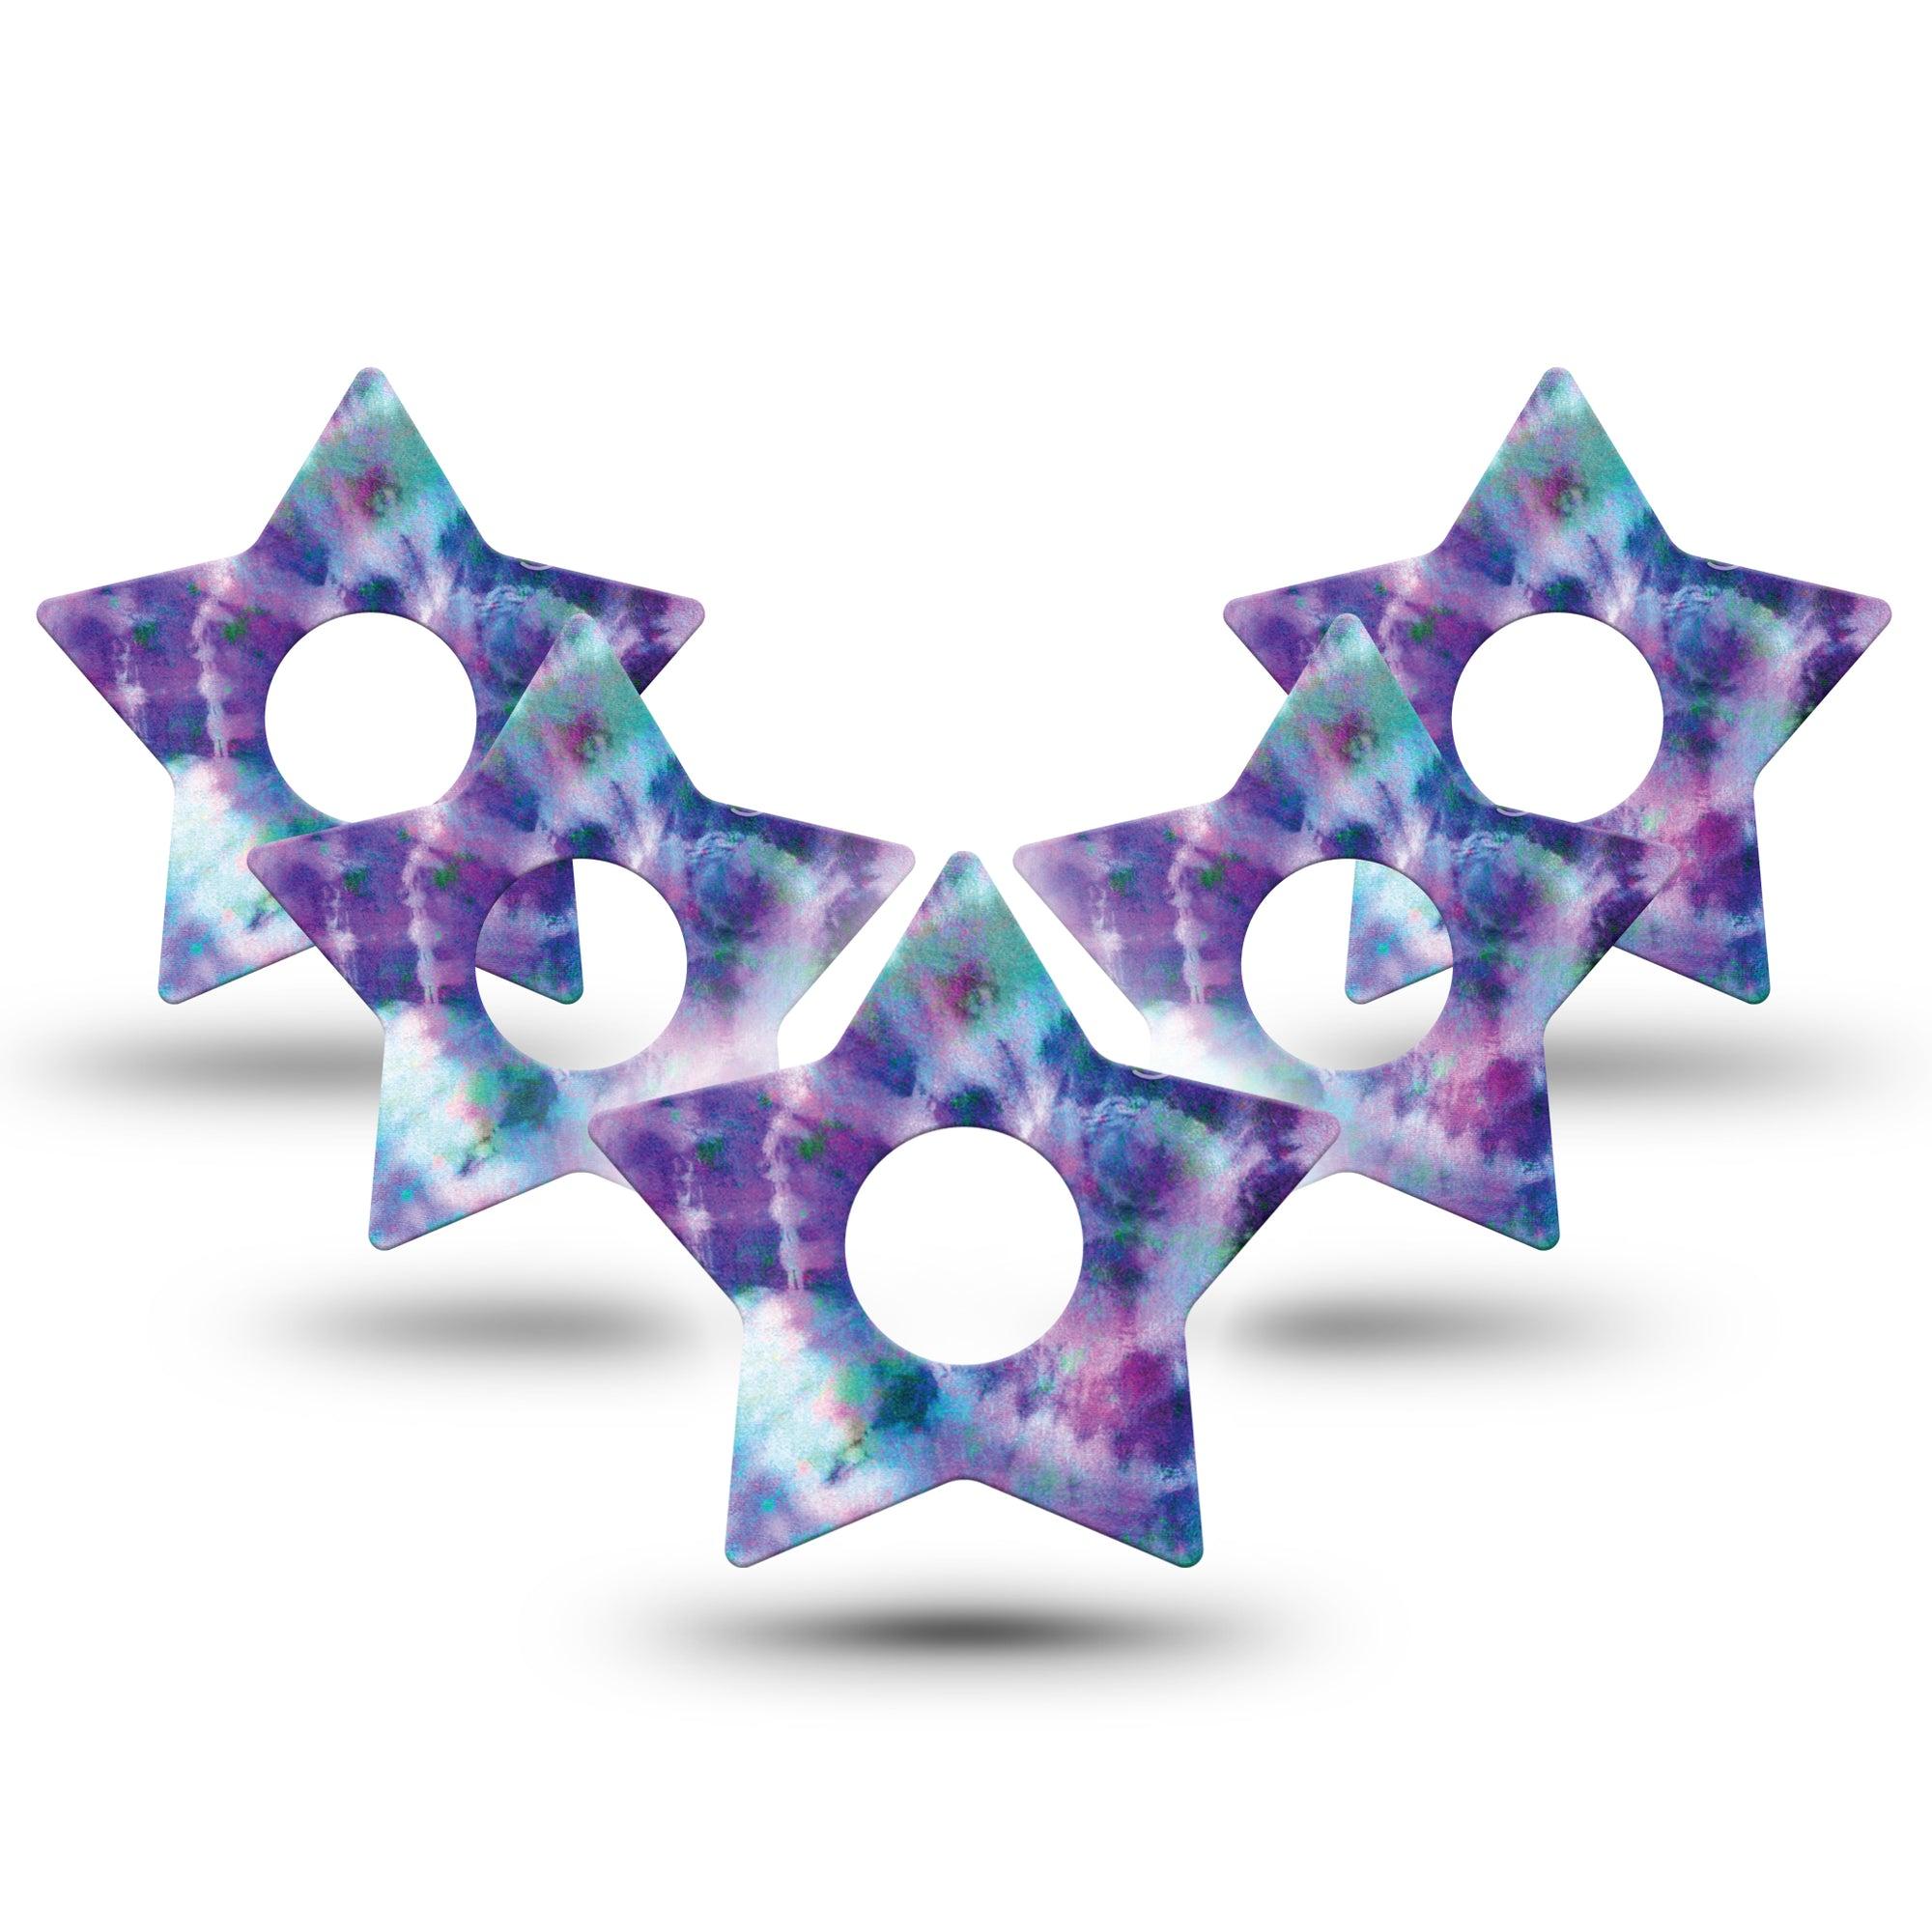 ExpressionMed Purple Tie Dye Star Libre 3 Tape, 5-Pack, Colored Waves Themed, CGM Adhesive Patch Design